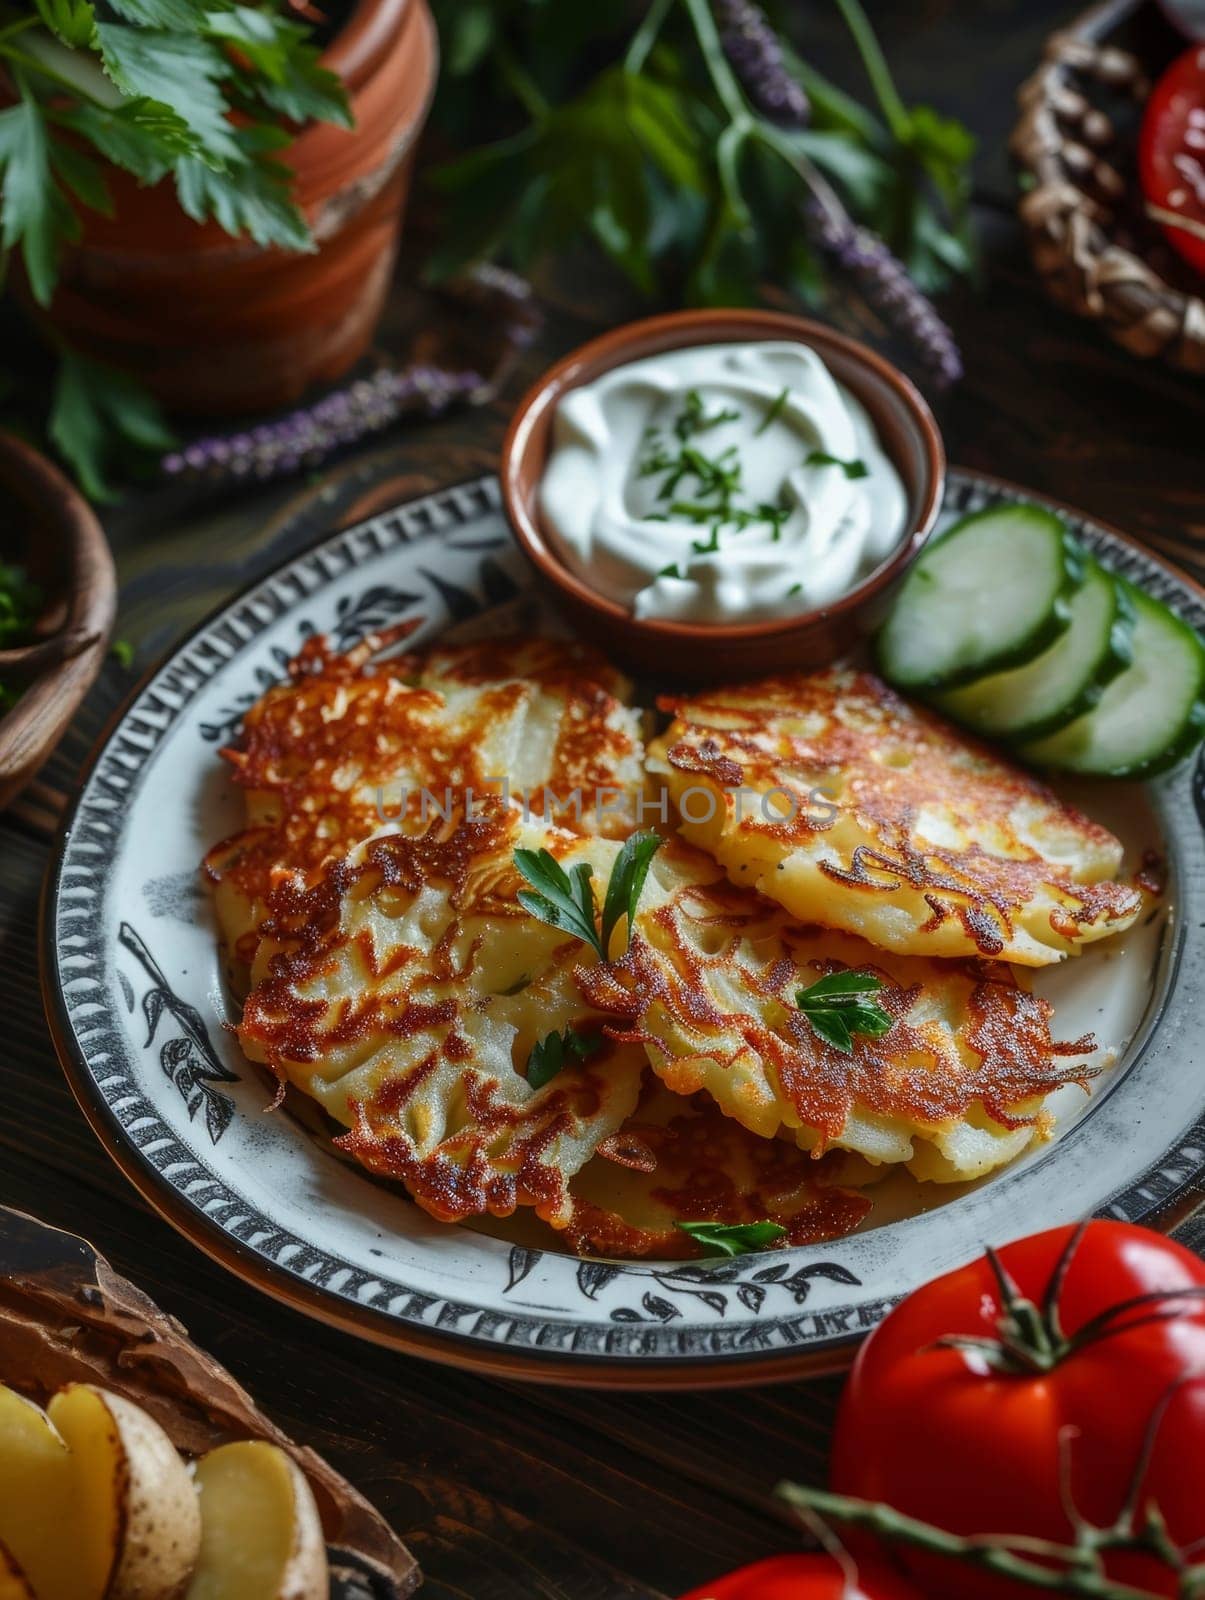 Belarusian draniki, thick and crispy potato pancakes, served on a traditional plate with a dollop of cool, creamy sour cream. This savory and comforting dish showcases the authentic flavors. by sfinks